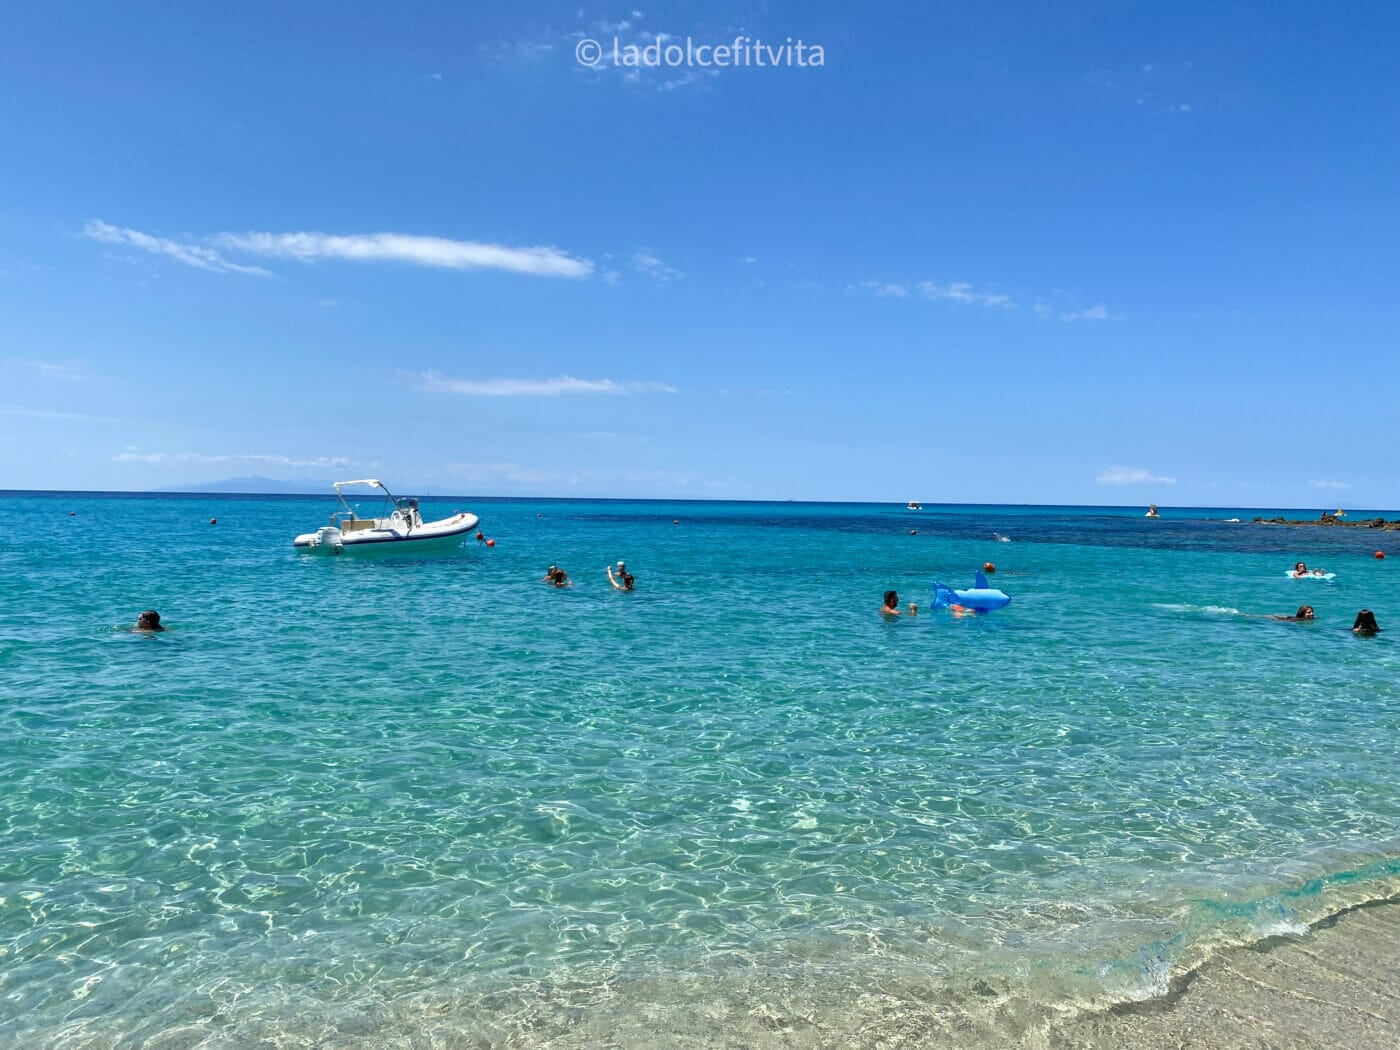 boat floating in stunning crystalline waters at a beach in Calabria Italy, Capo Vaticano Grotticelle beach